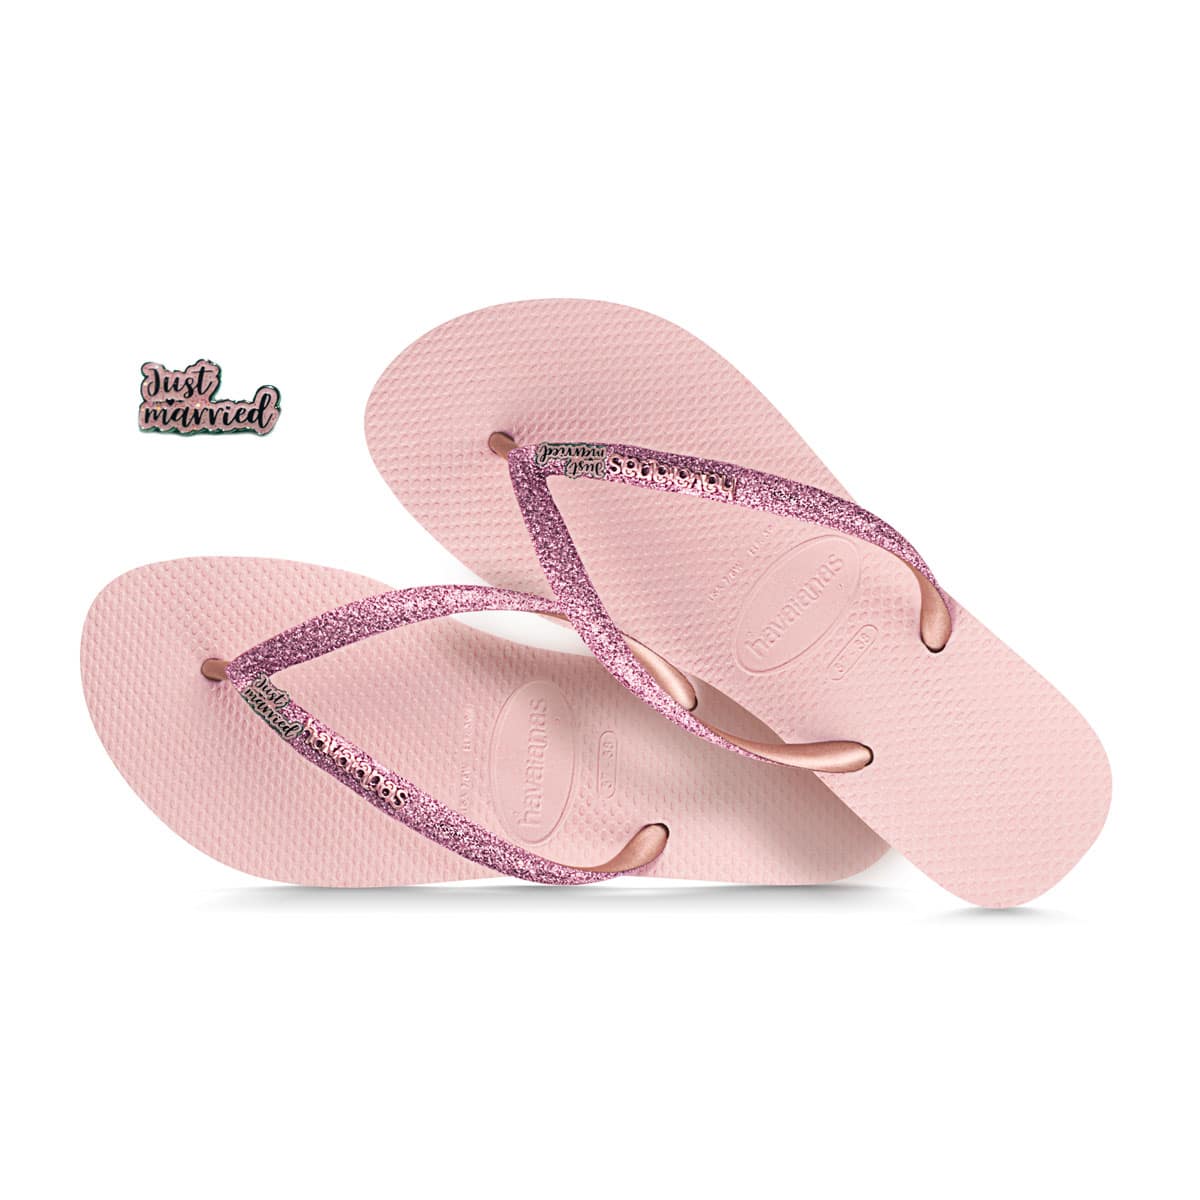 Just Married Pink Glitter Havaianas 